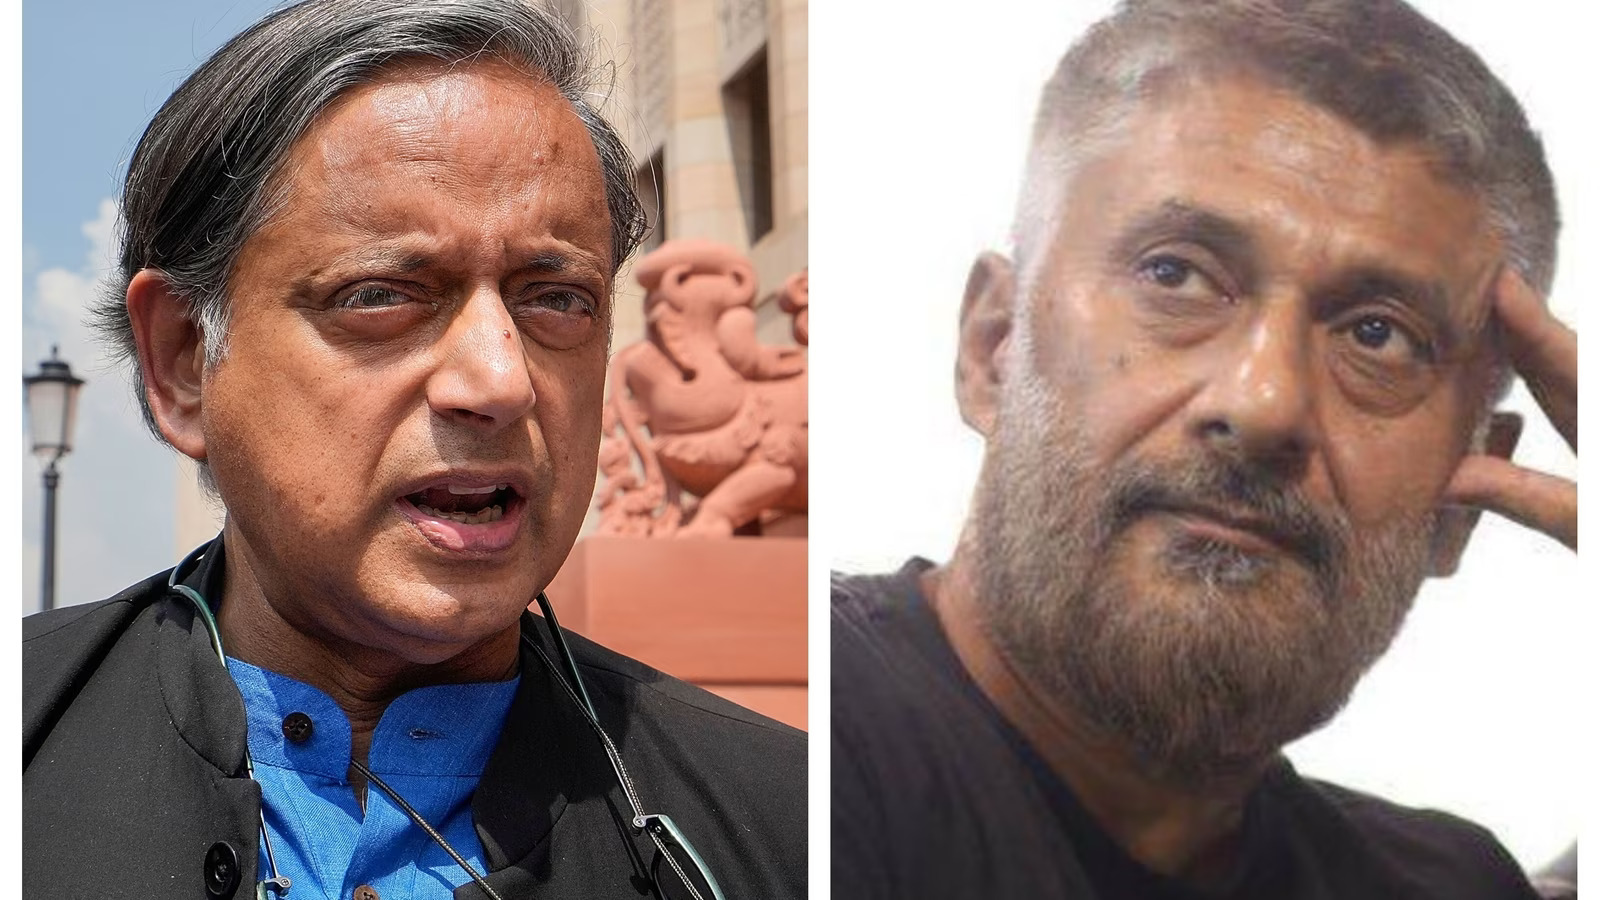 Shashi Tharoor Accuses Vivek Agnihotri of Seeking Publicity with Vaccine Claims